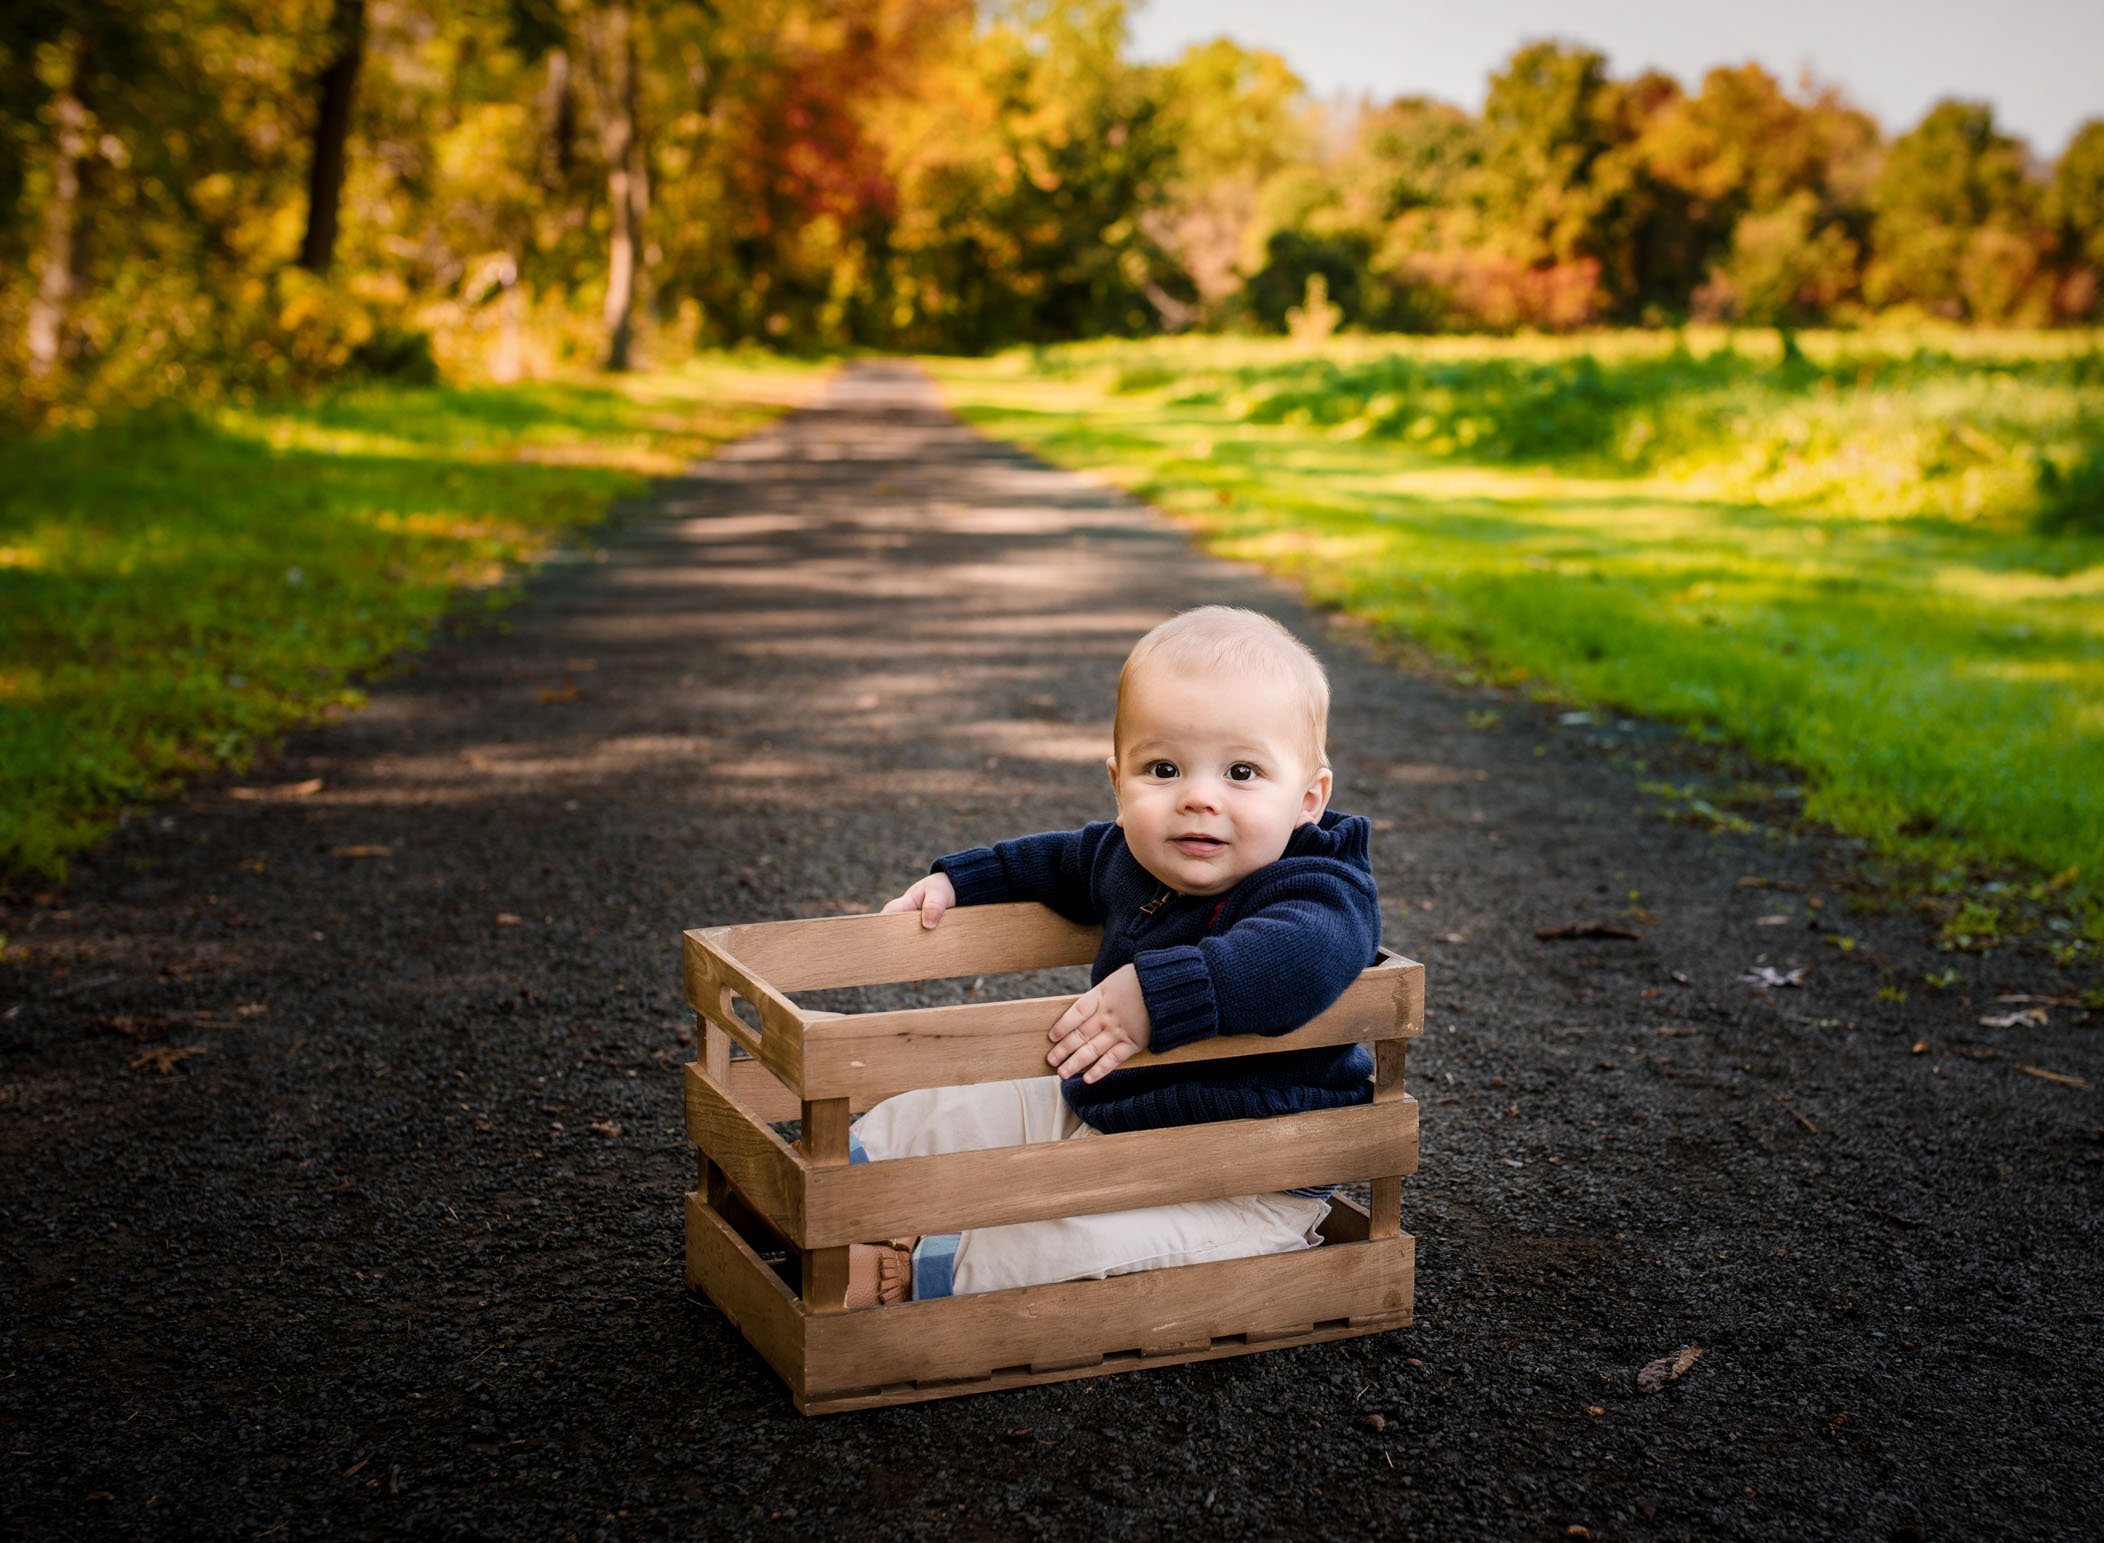 6 month old boy sitting in a crate outside on a path in fall